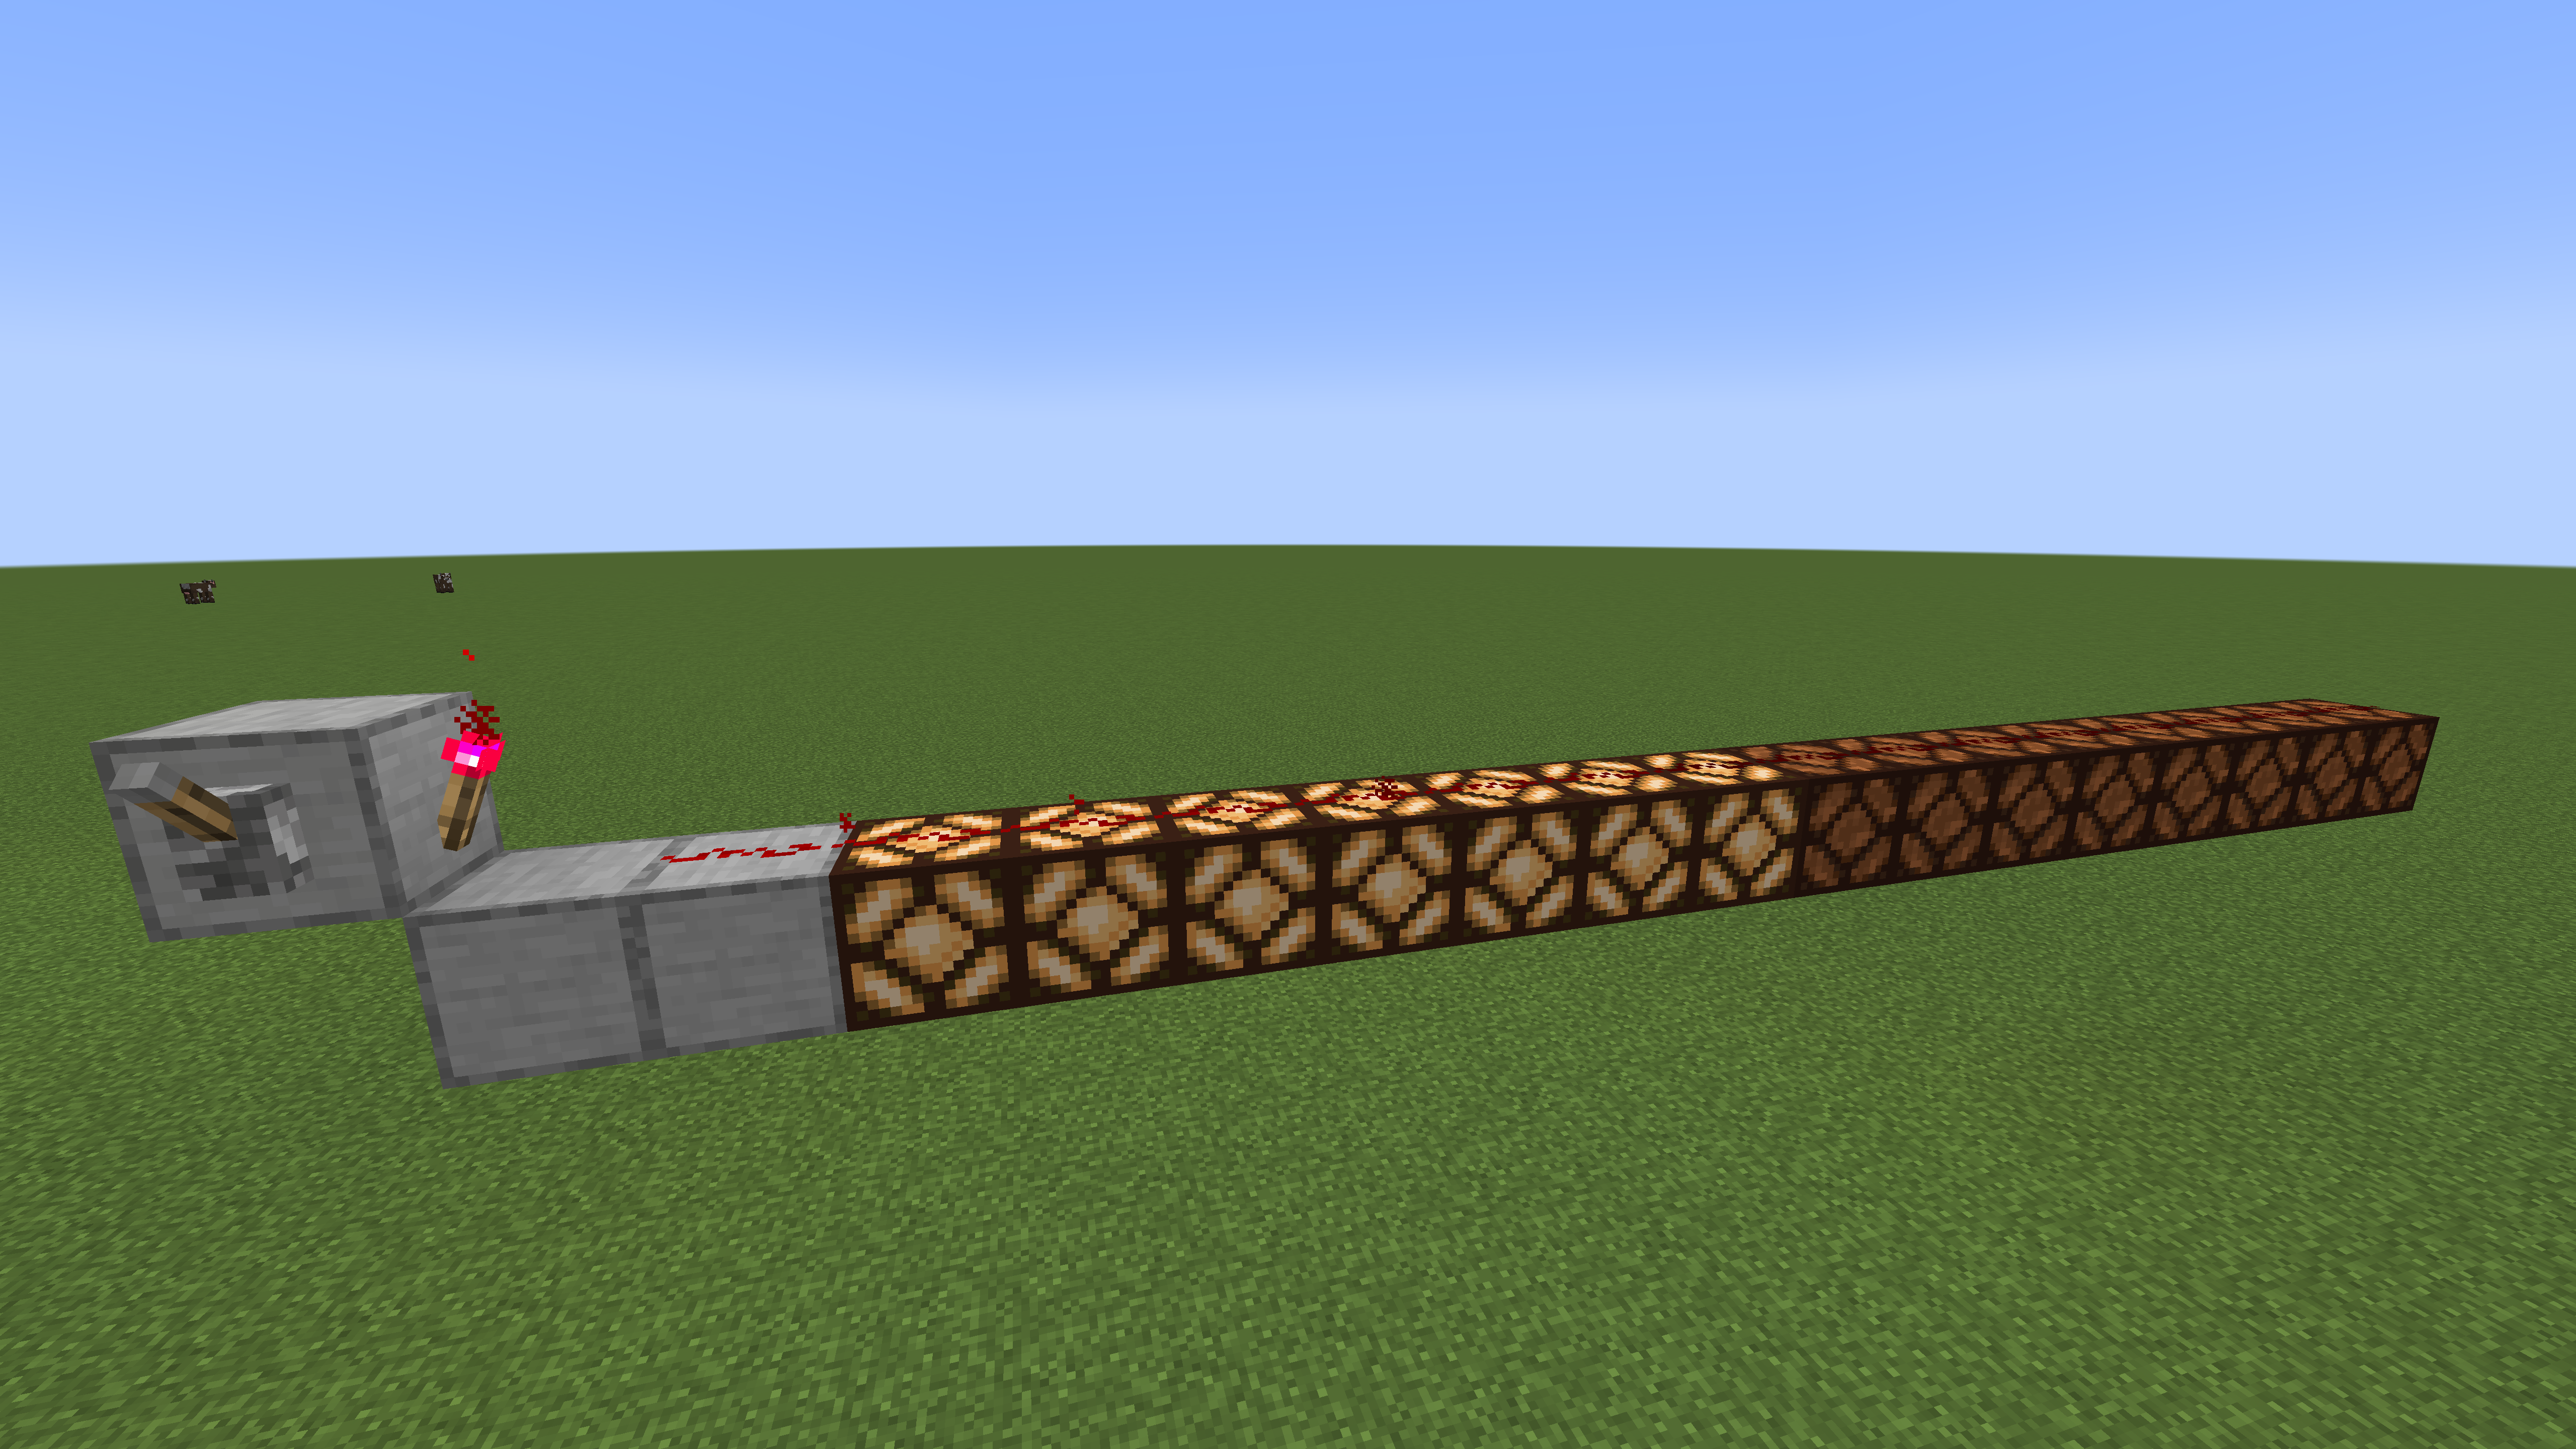 An example of the Calibrated Redstone Torch's functionality where the signal strength is set to 7.